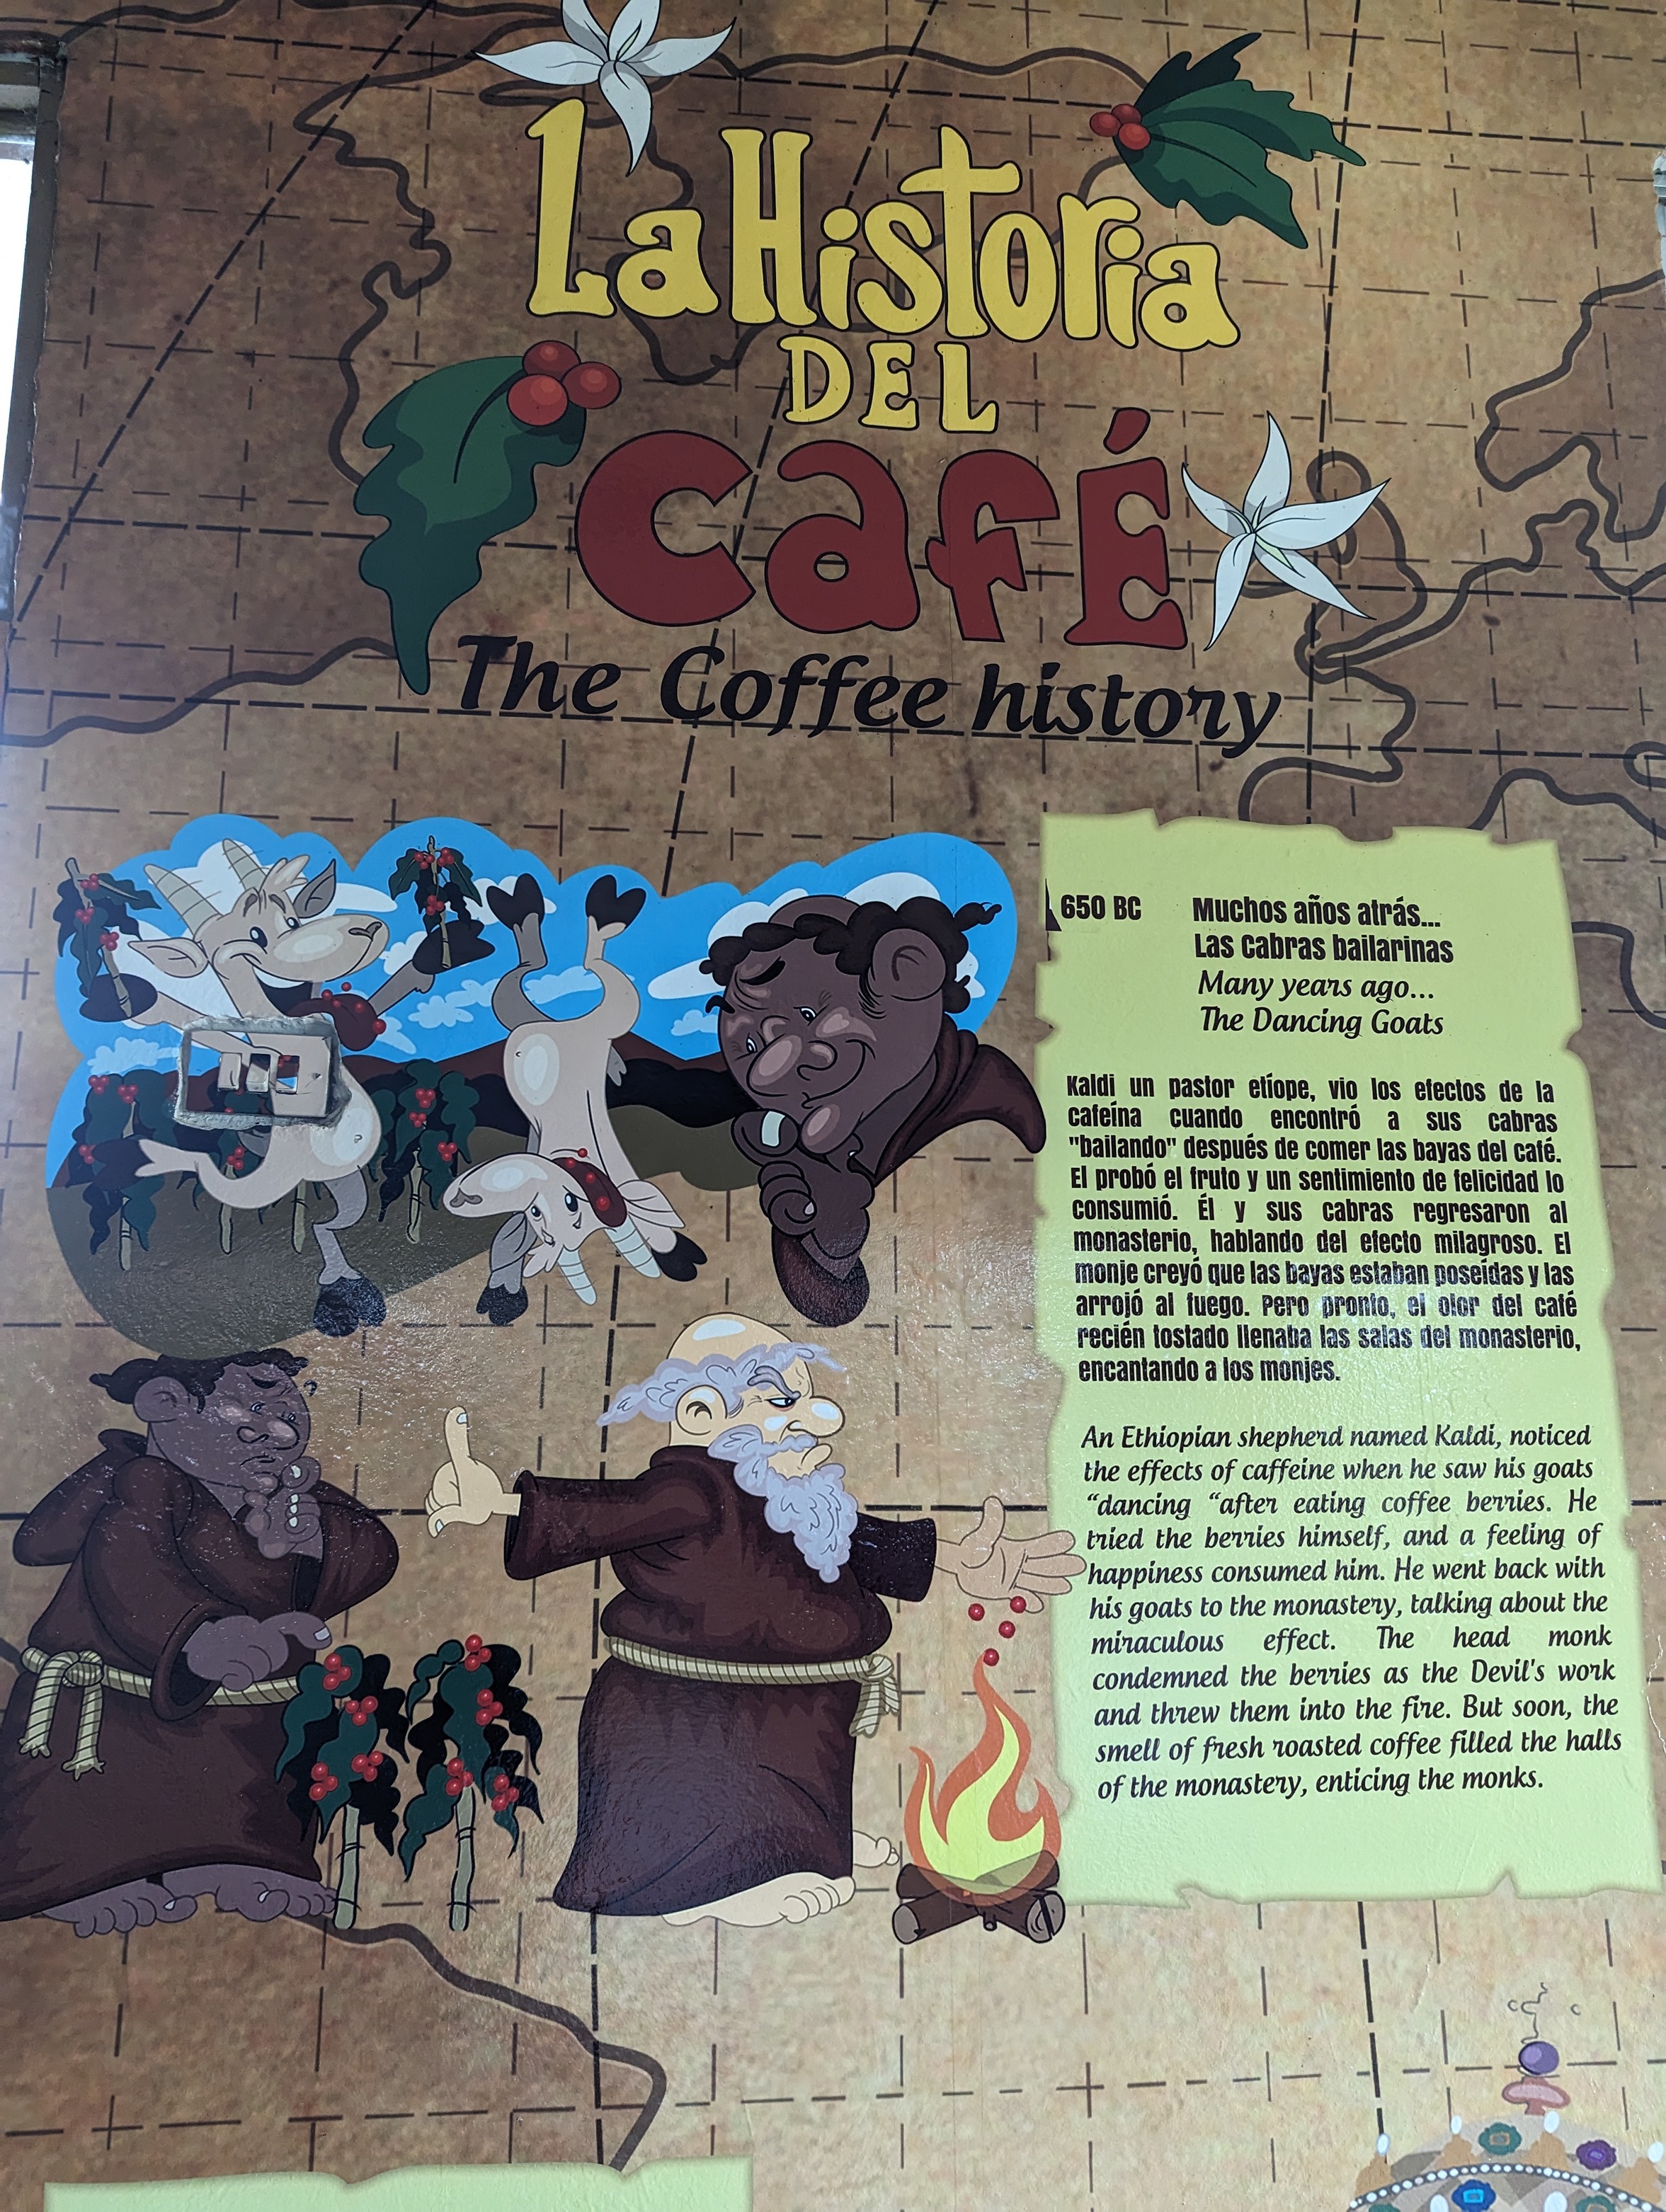 Poster showing history of coffee